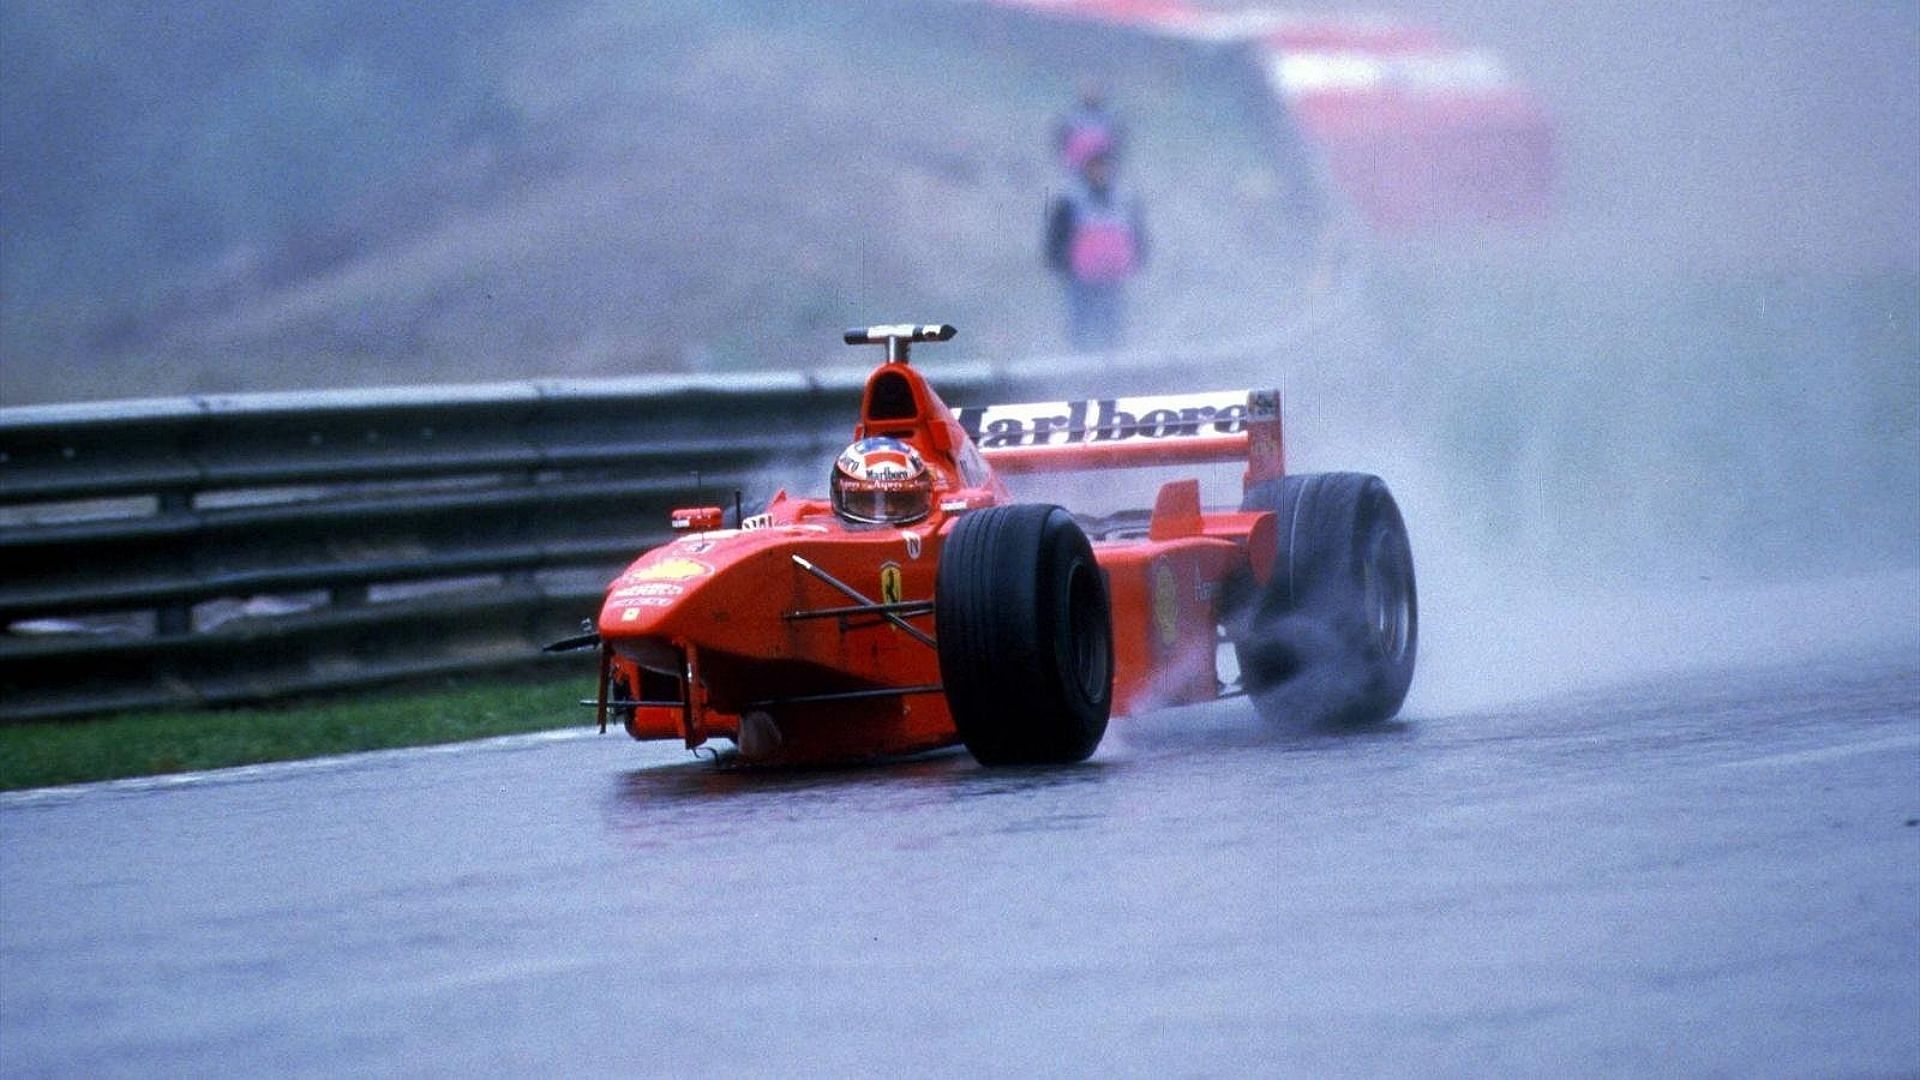 Michael Schumacher driving his three-wheeled Ferrari back to the pits after colliding with David Coulthard at the 1998 F1 Belgian Grand Prix (Image via Twitter/MsportXtra)